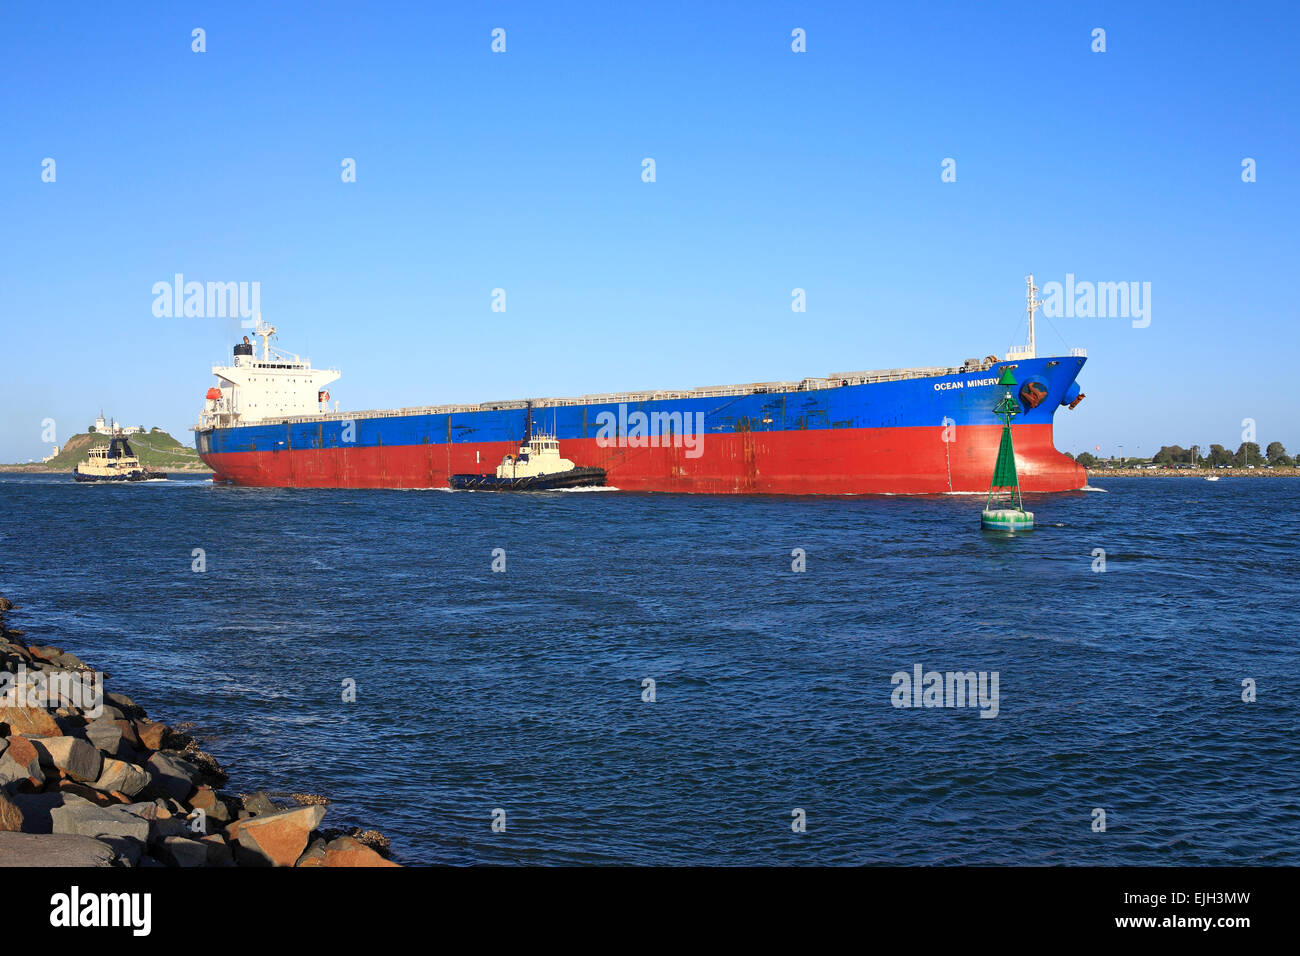 A large cargo ship entering the Hunter River on its way to the Port of Newcastle, NSW, Australia. There are two tugs assisting. Stock Photo